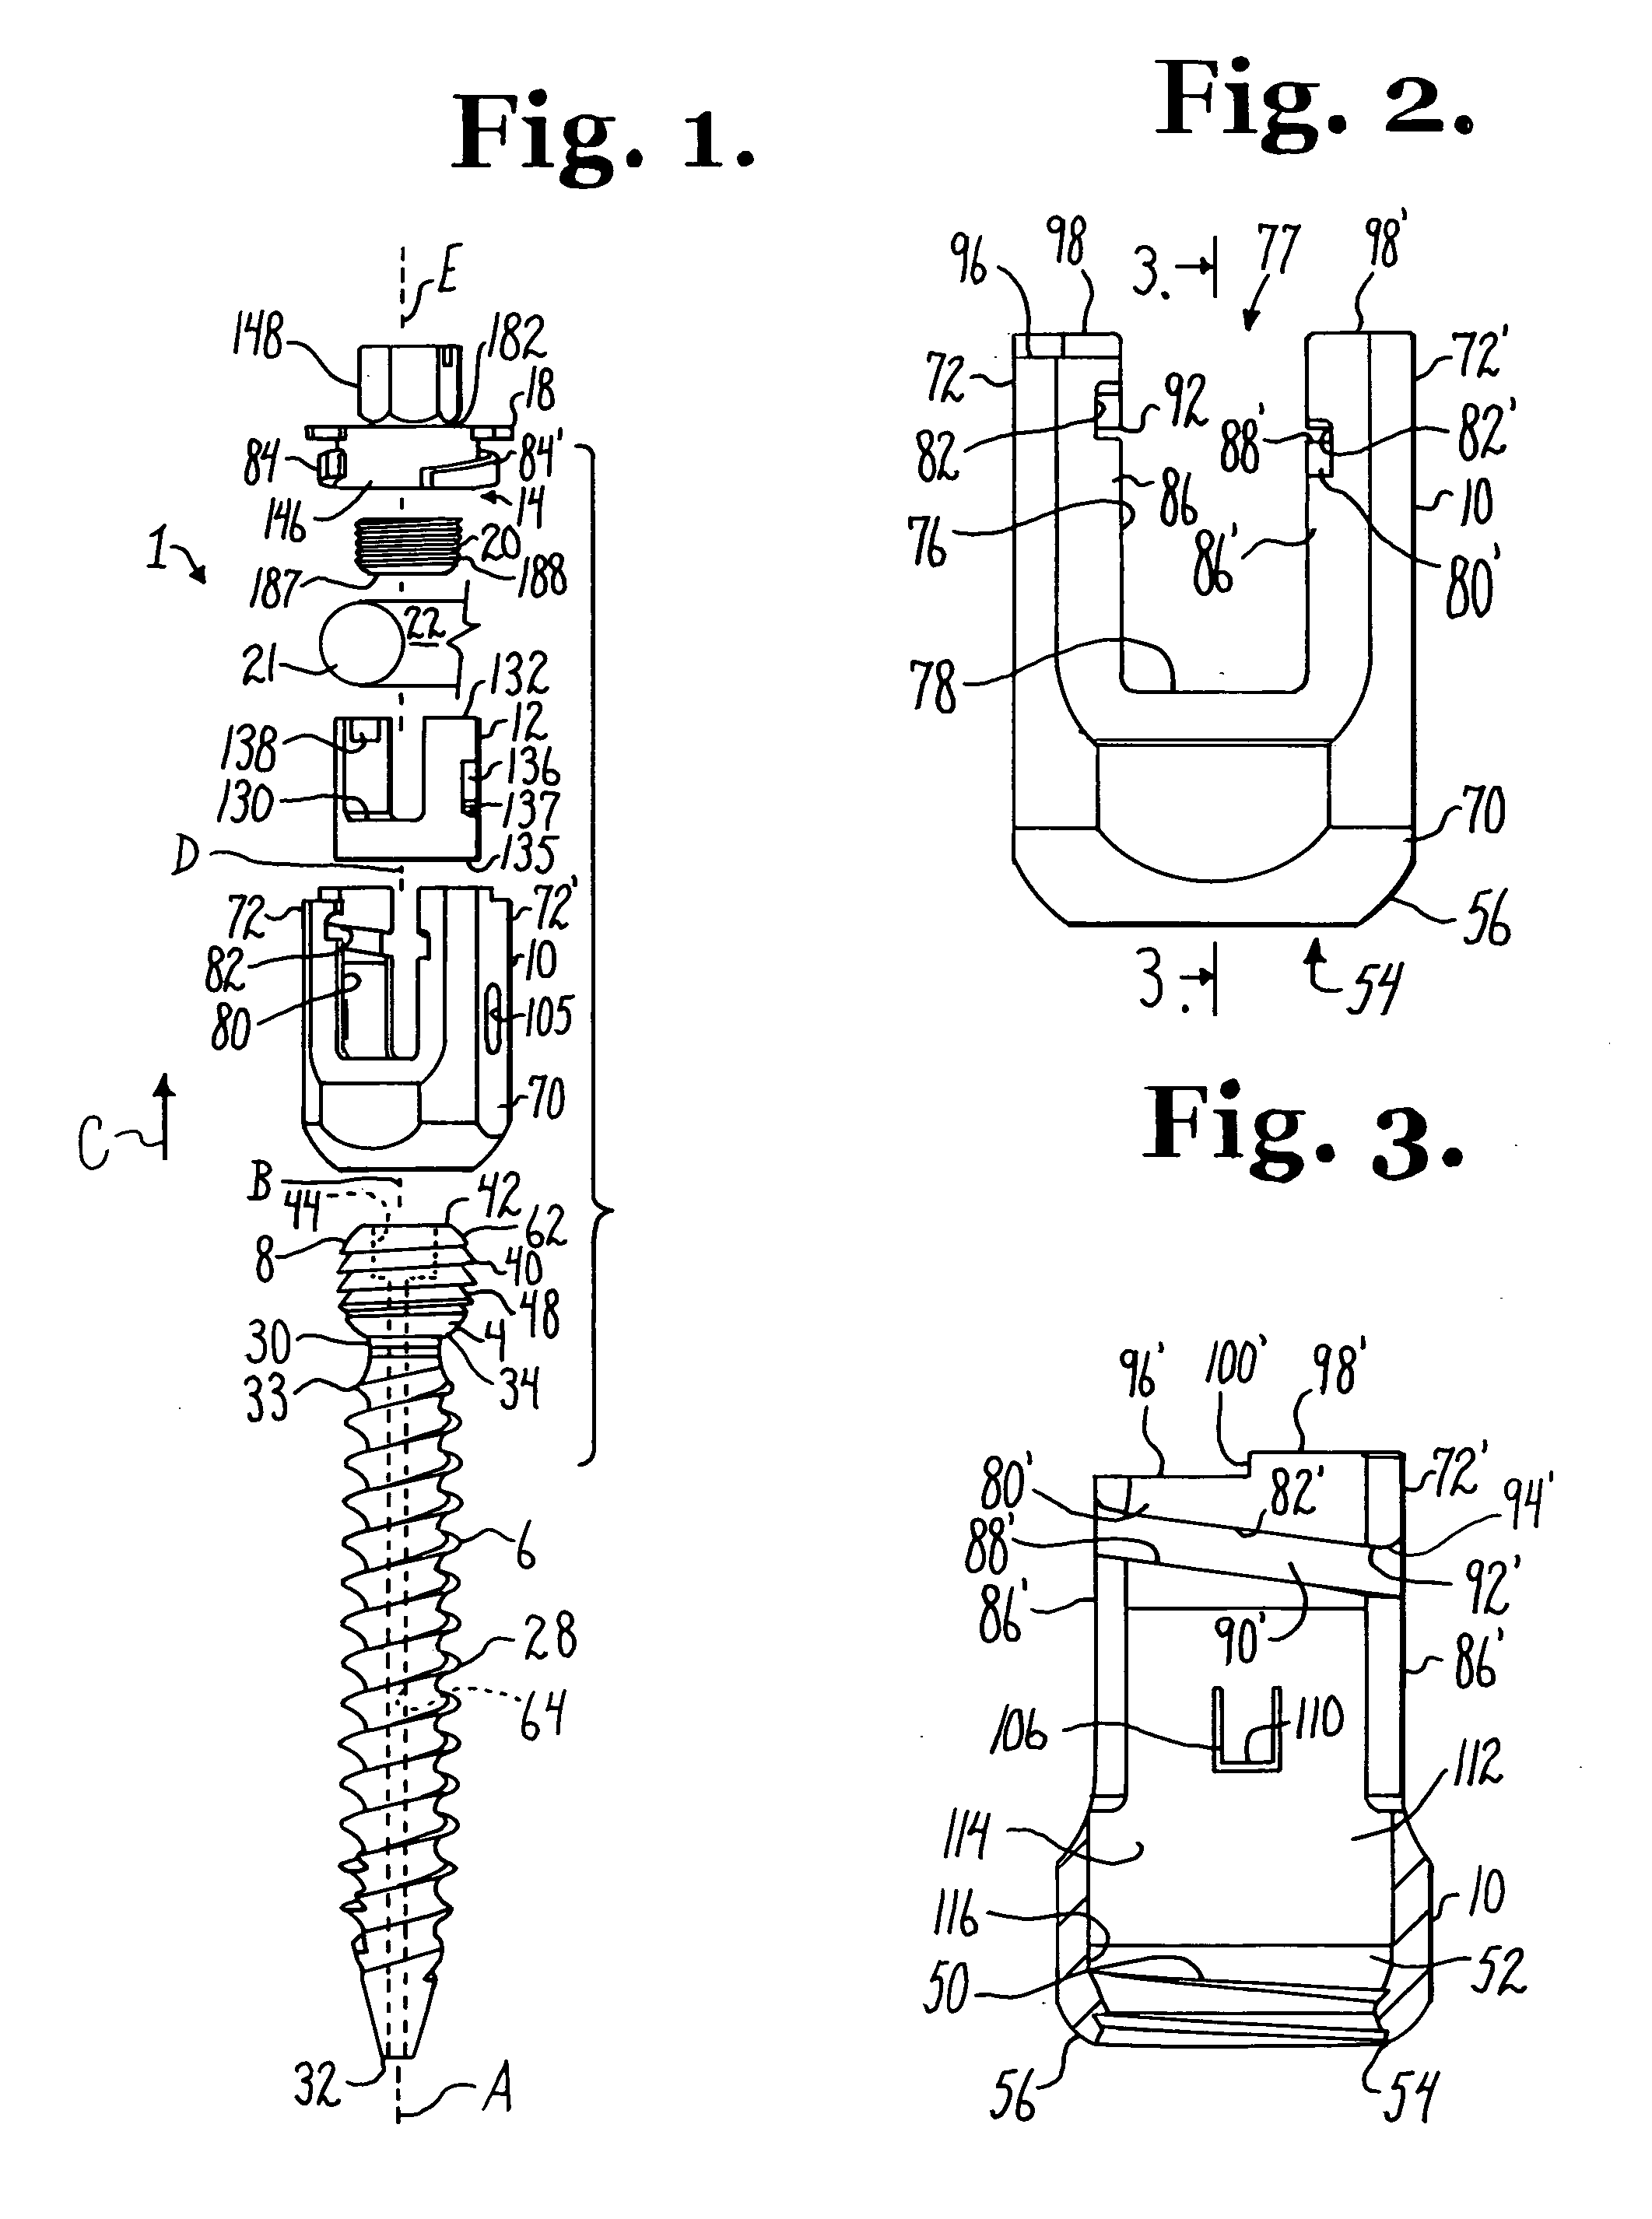 Polyaxial bone anchor with helical capture connection, insert and dual locking assembly